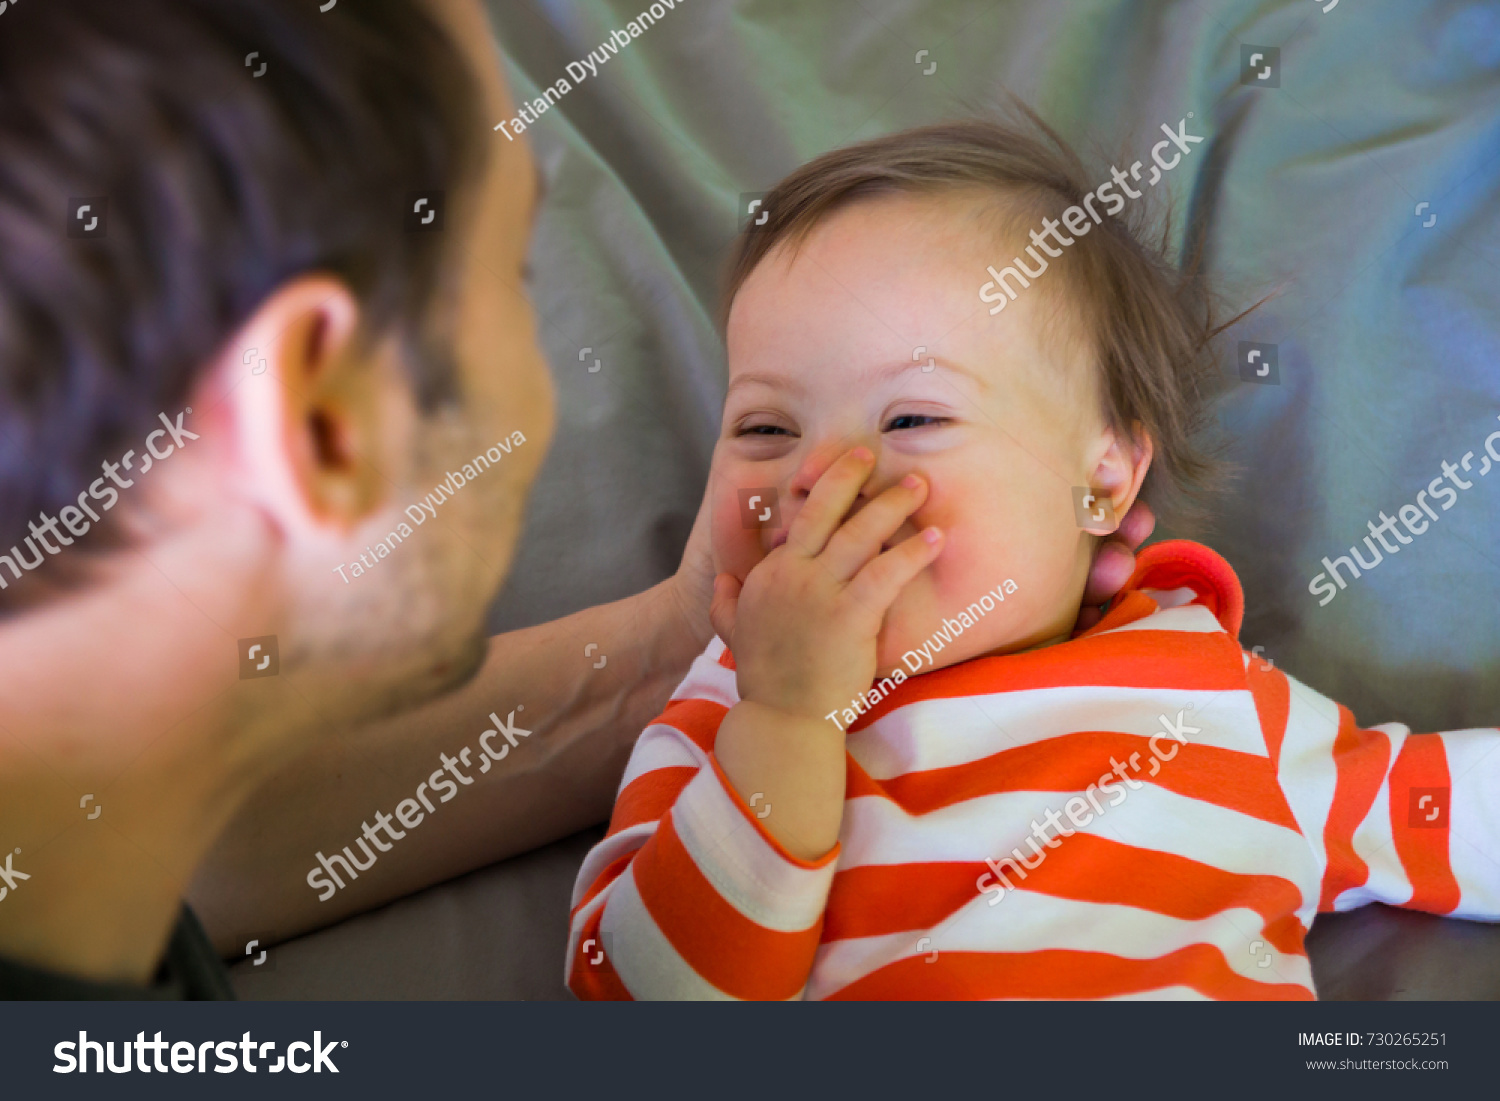 Cute baby boy with Down syndrome playing with dad on the bed in home bedroom #730265251